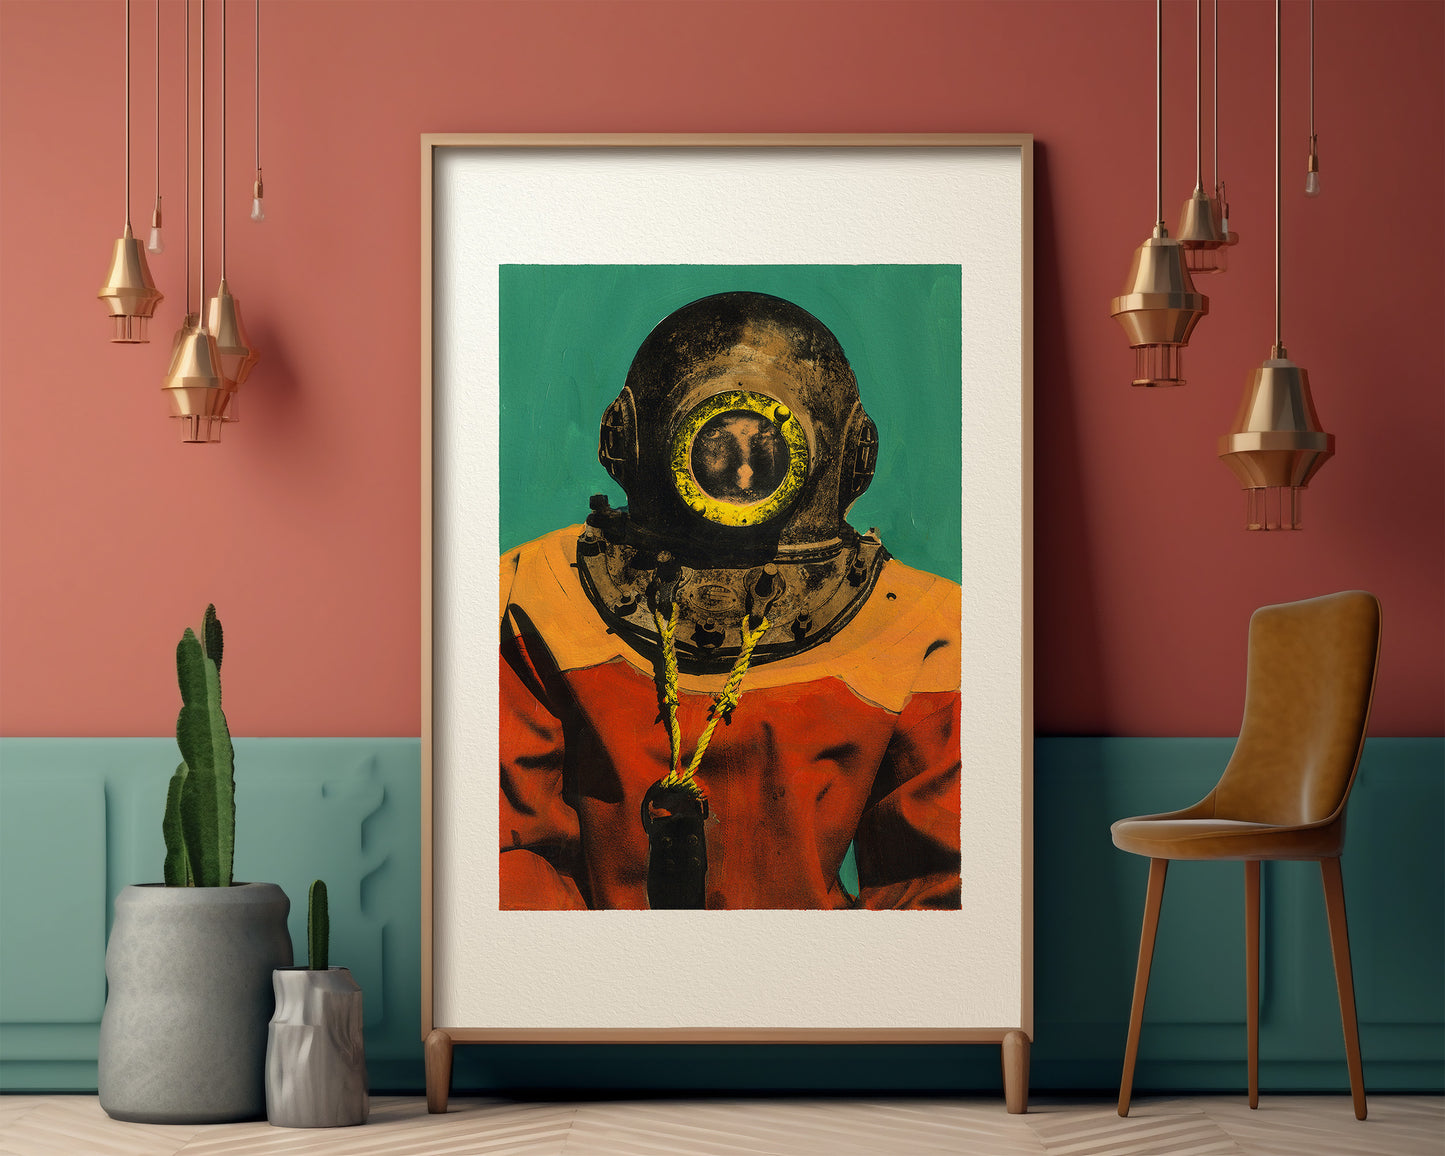 Painting Pop Art Wall Art from Greece | Orange & Green sponge diver from Kalymnos island, by George Tatakis - inside an eclectic room